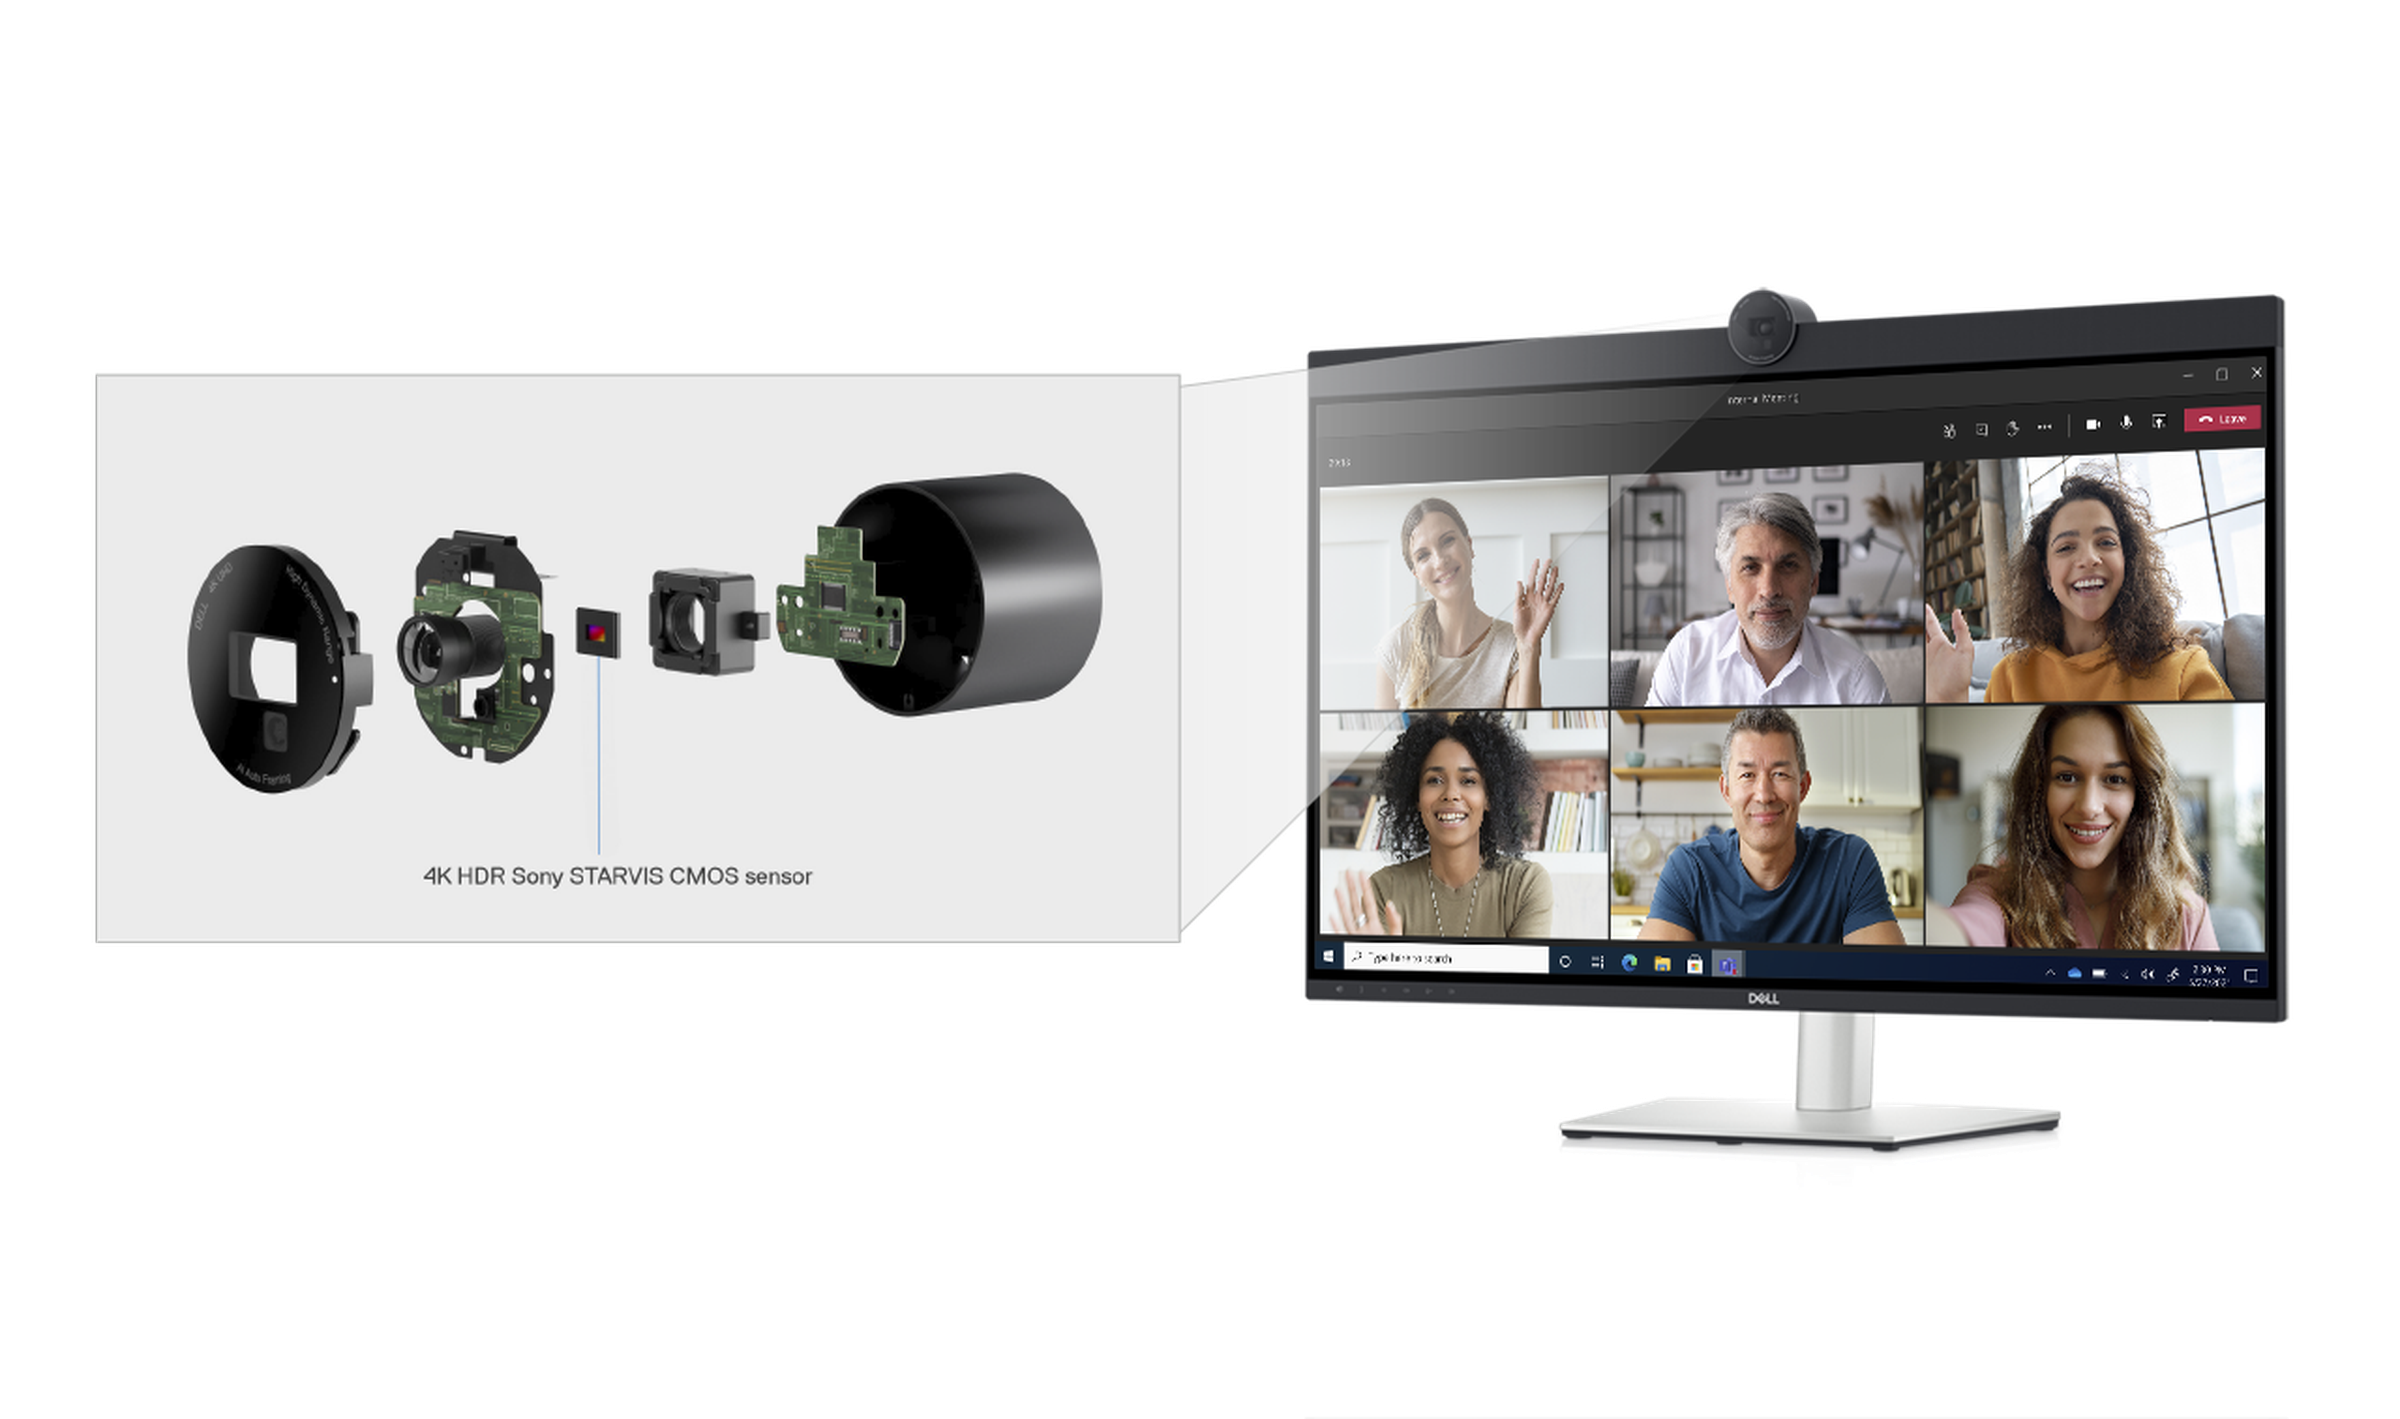 The webcam will let you show up crystal clear in meetings, and also lets you unlock your computer with Windows Hello.